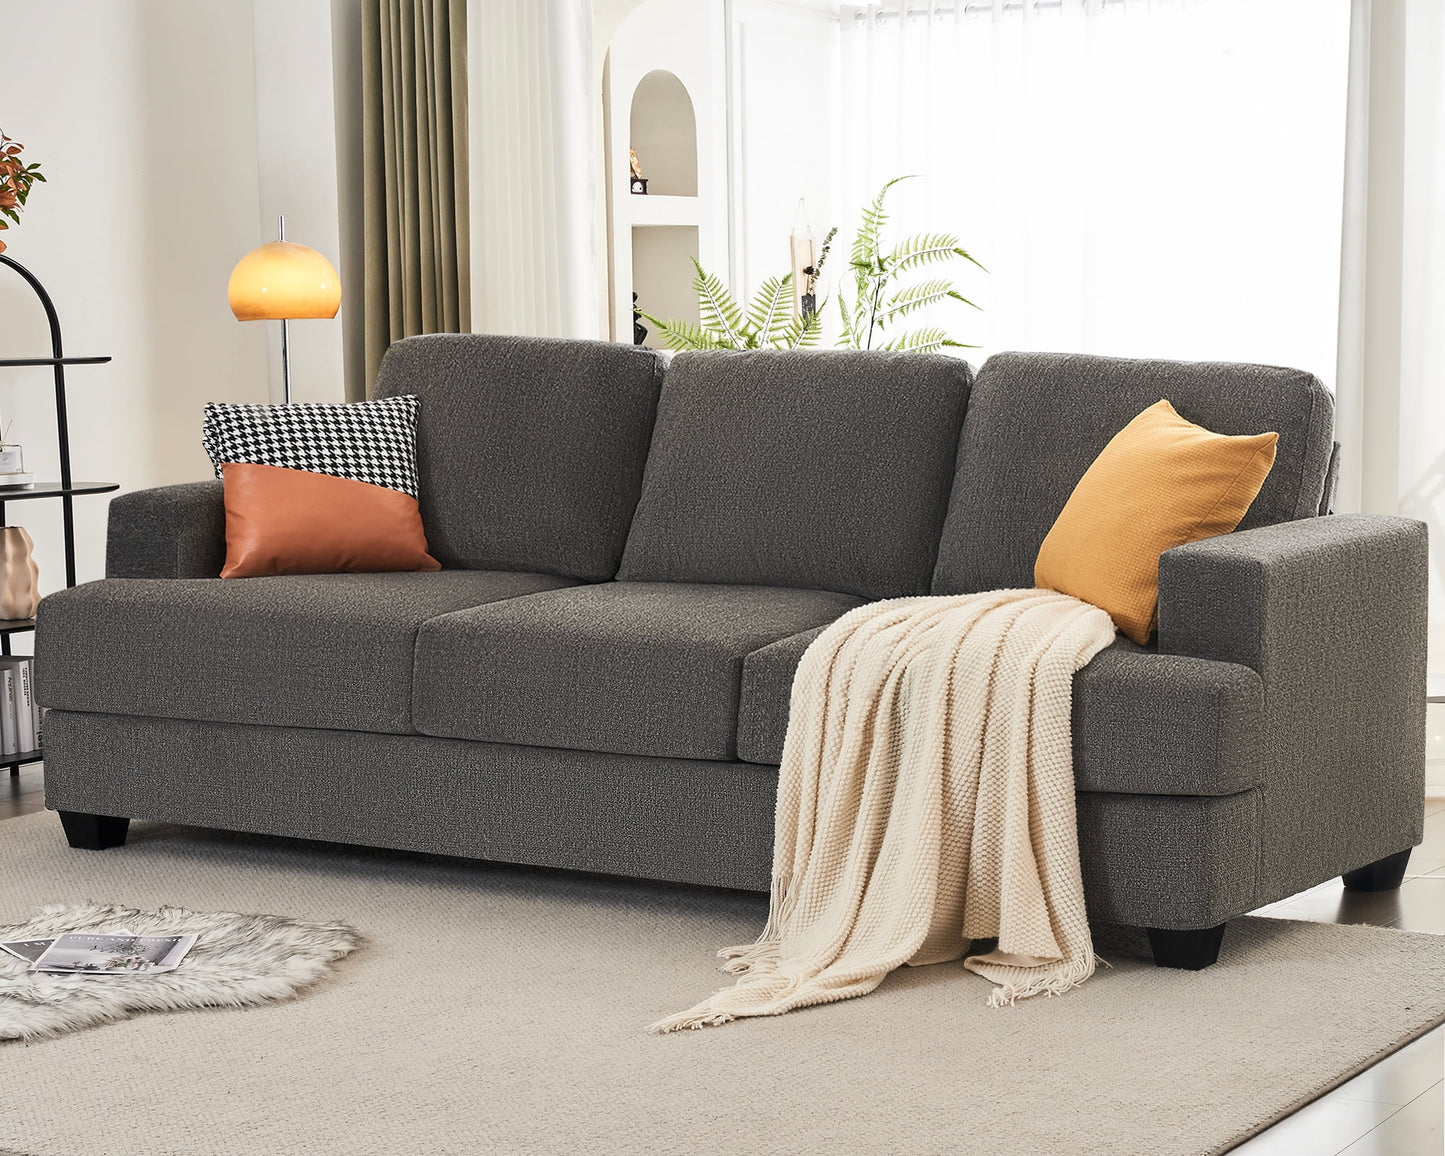 Amerlife 89 inch Sofa, Comfy Couch with Deep Seats, 3 Seater Sofa for Living Room, Grey Chenille